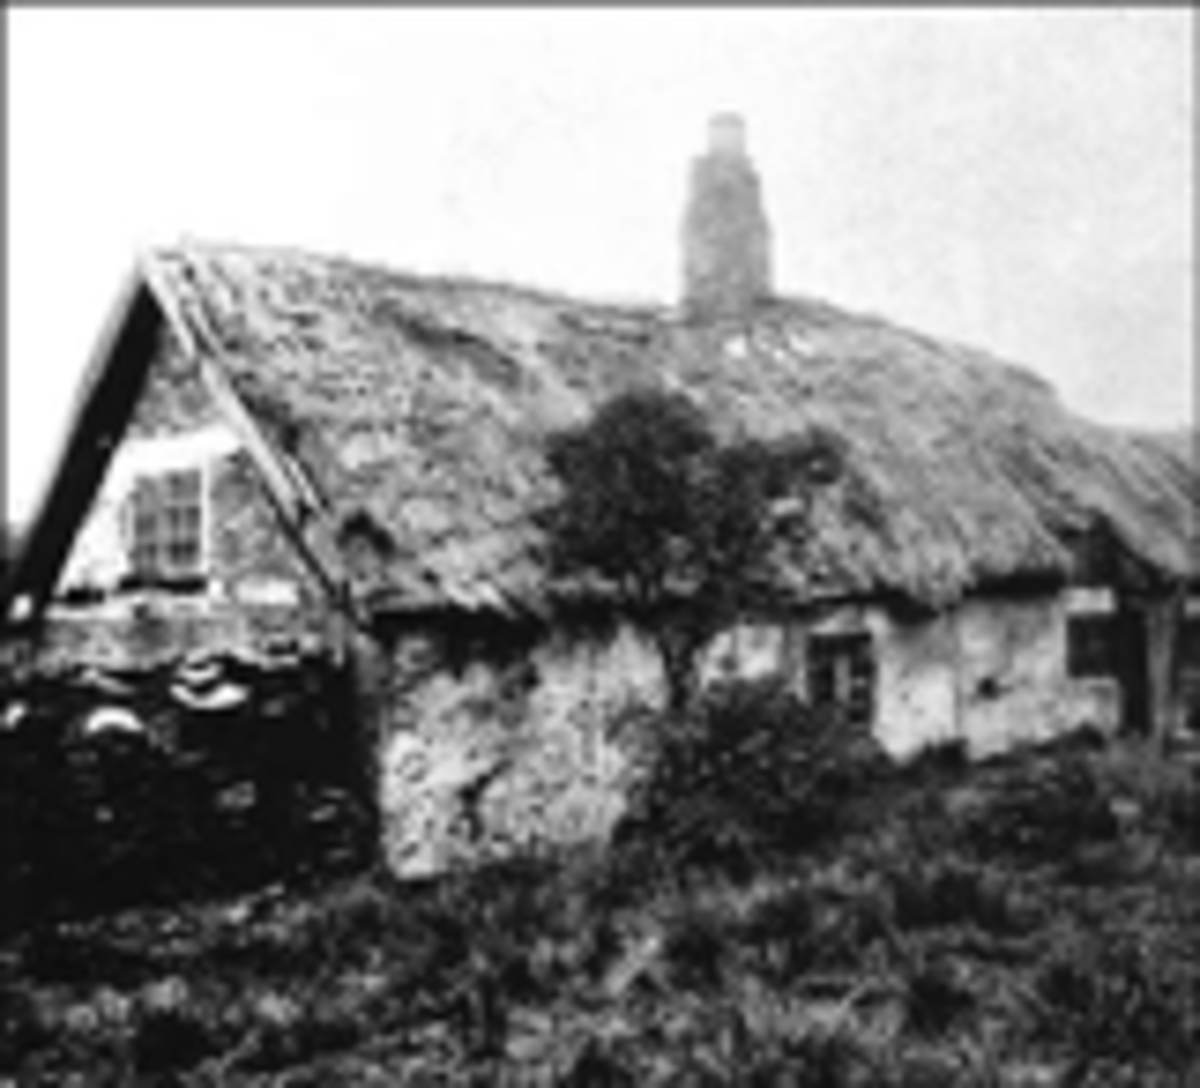 Molly Leigh's cottage that was demolished in 1894.